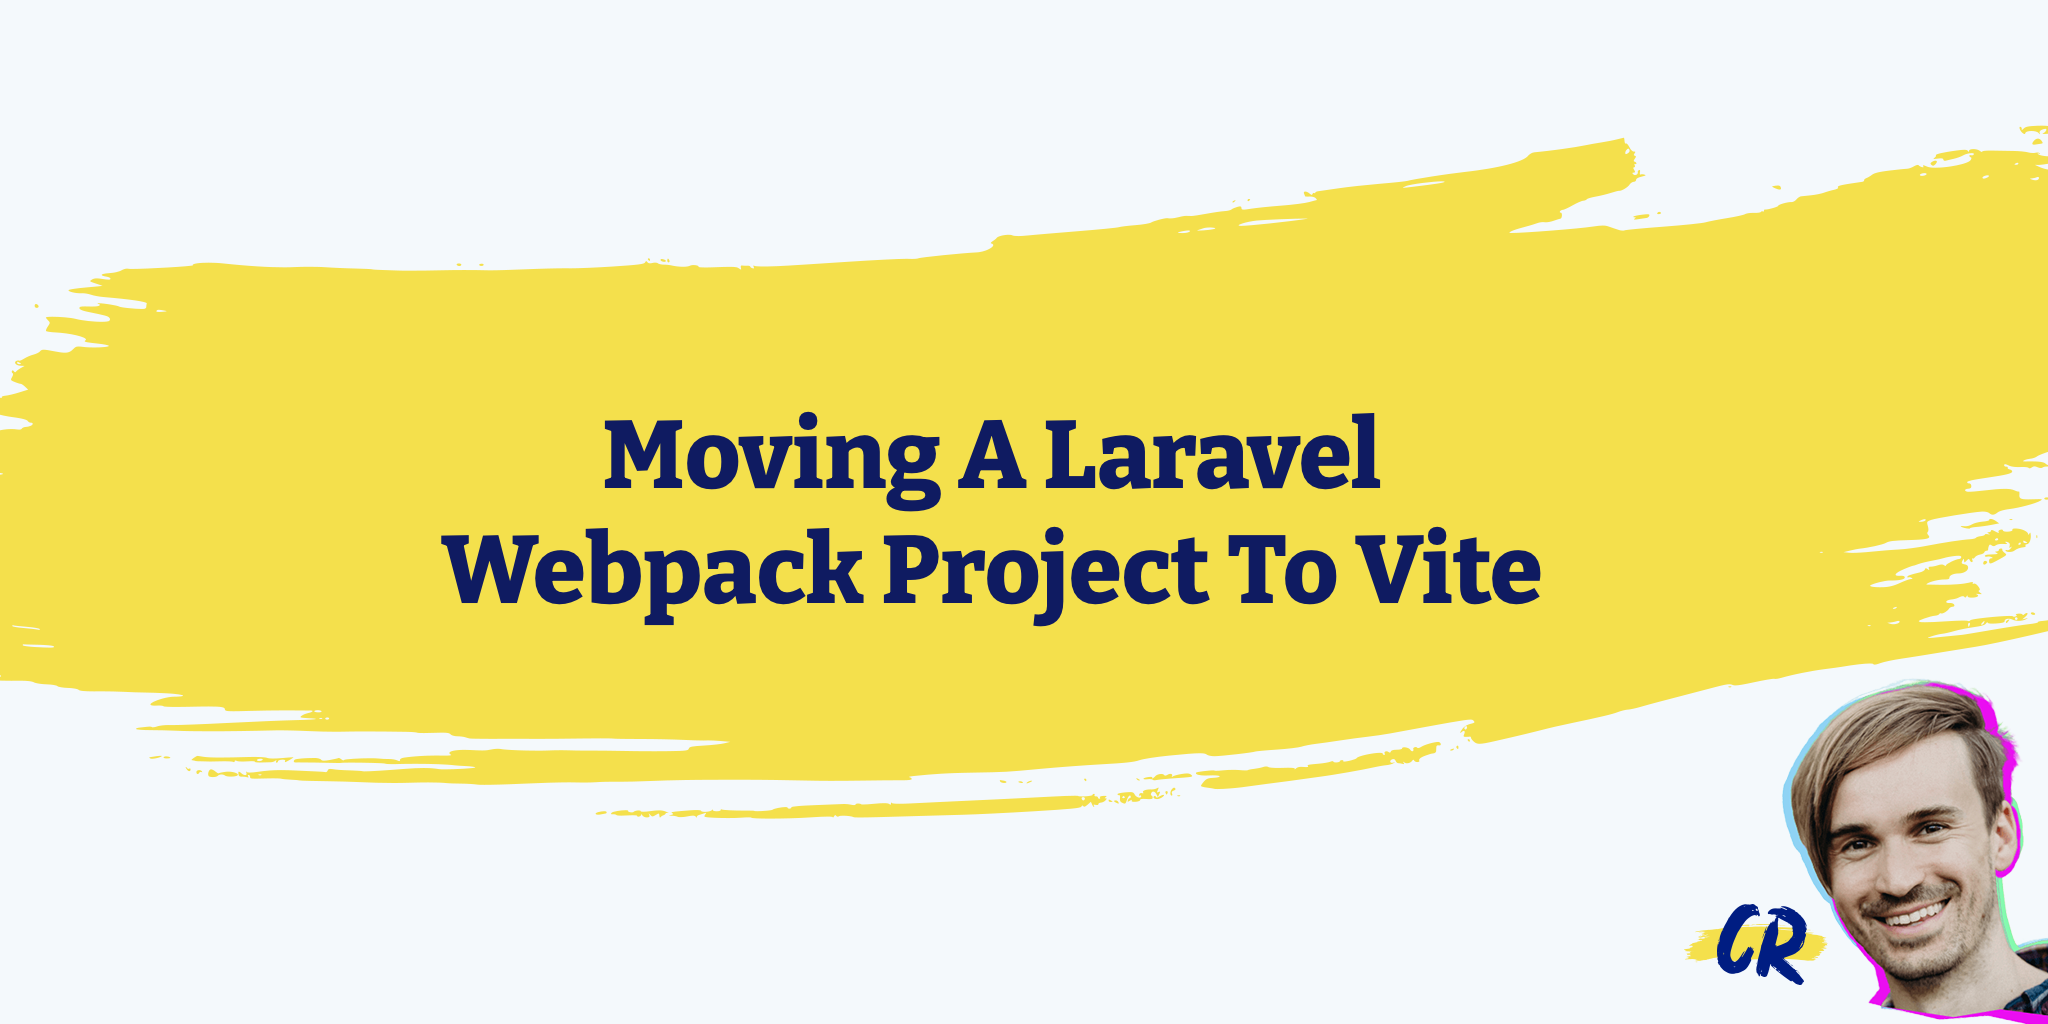                  Vite is the new front-end tooling for Laravel. Let's see how we can move a given Laravel project to Vite together.              The L